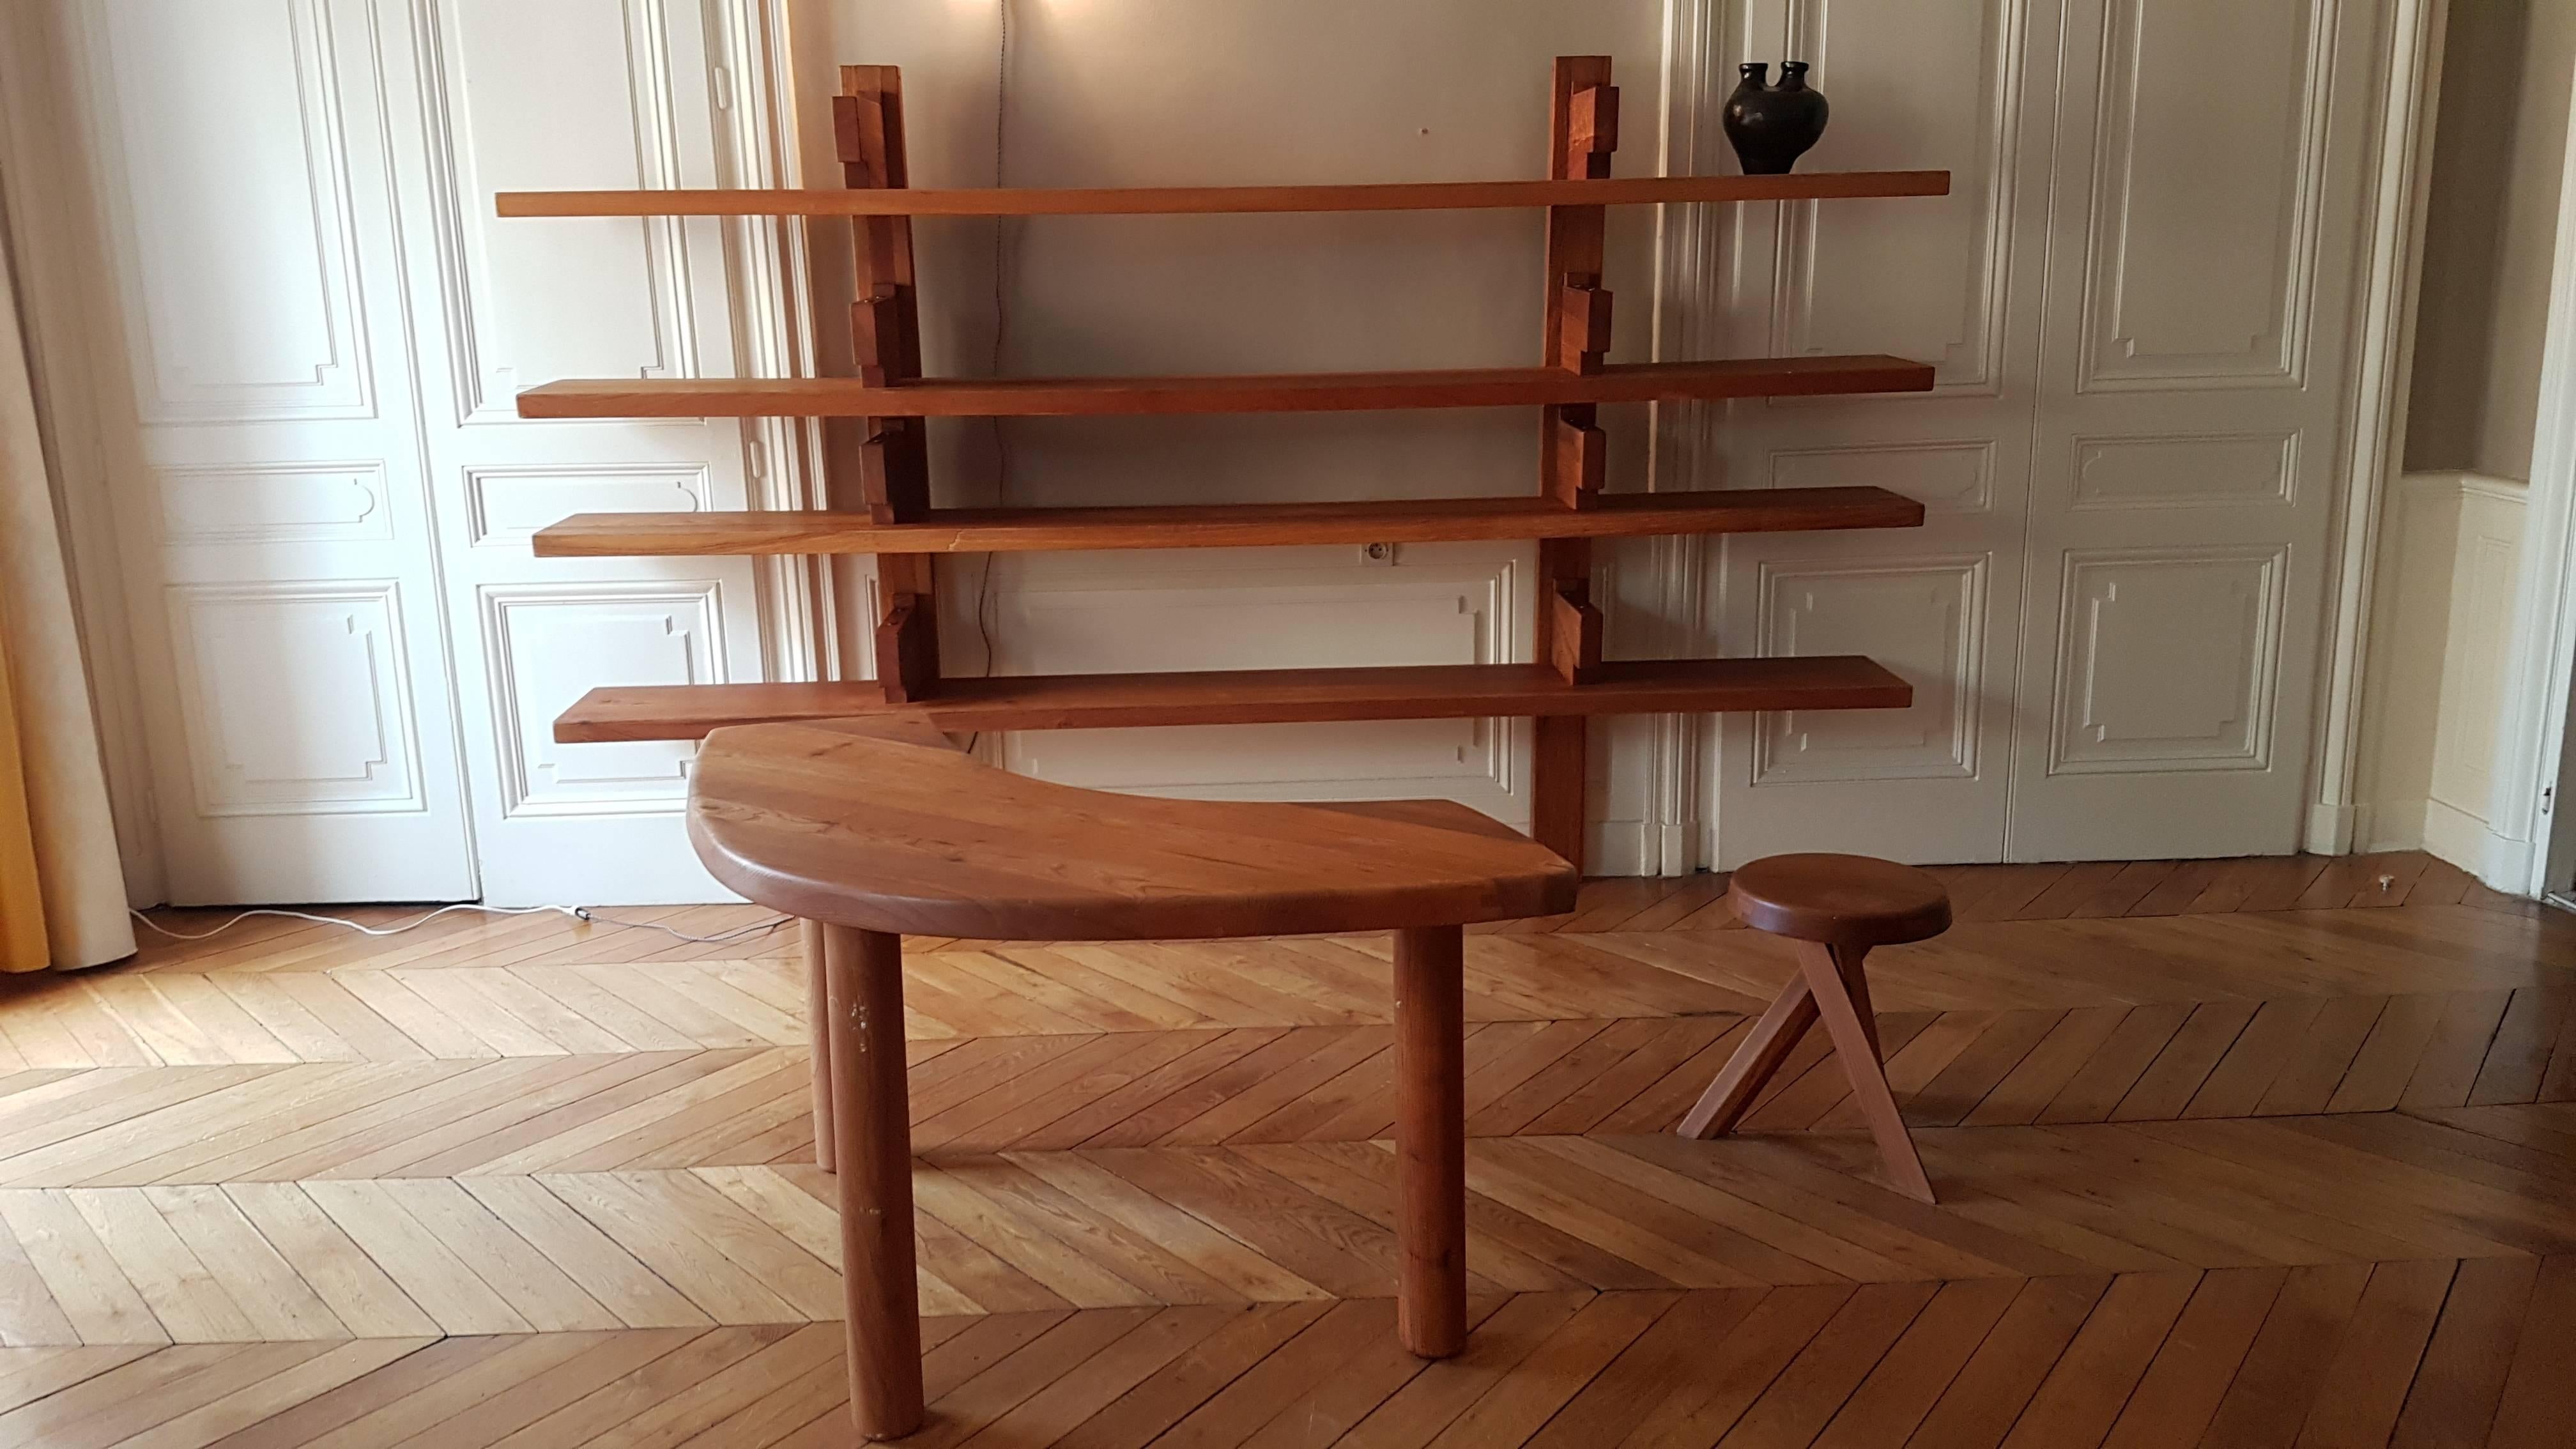 Table Pierre Chapo T 22 B in French Orme, 1971 Date under the shelf his table can also serve as desk, console. Table of great elegance, a pure design approaching Charlotte Perriand. The table is in an excellent condition. Measures: L 156cm/ H 73/